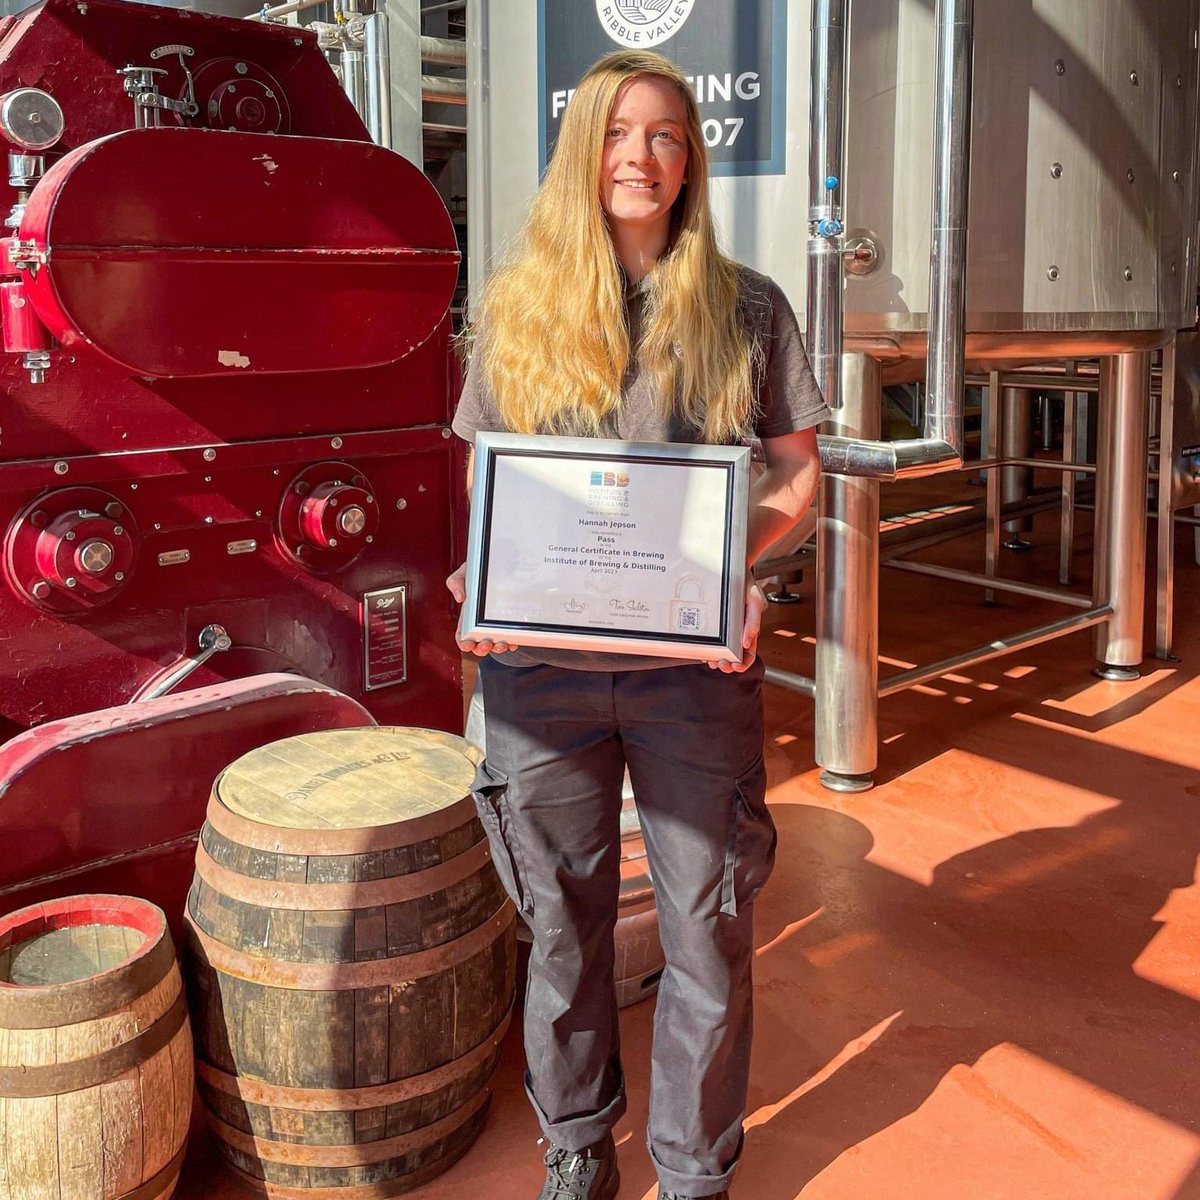 We are delighted to announce that our youngest brewer Hannah has recently passed her General Certificate in Brewing! This qualification covers the whole brewing process and allows Hannah to further develop her knowledge and skills in the world of cask ale. Well done hannah!👏🏻